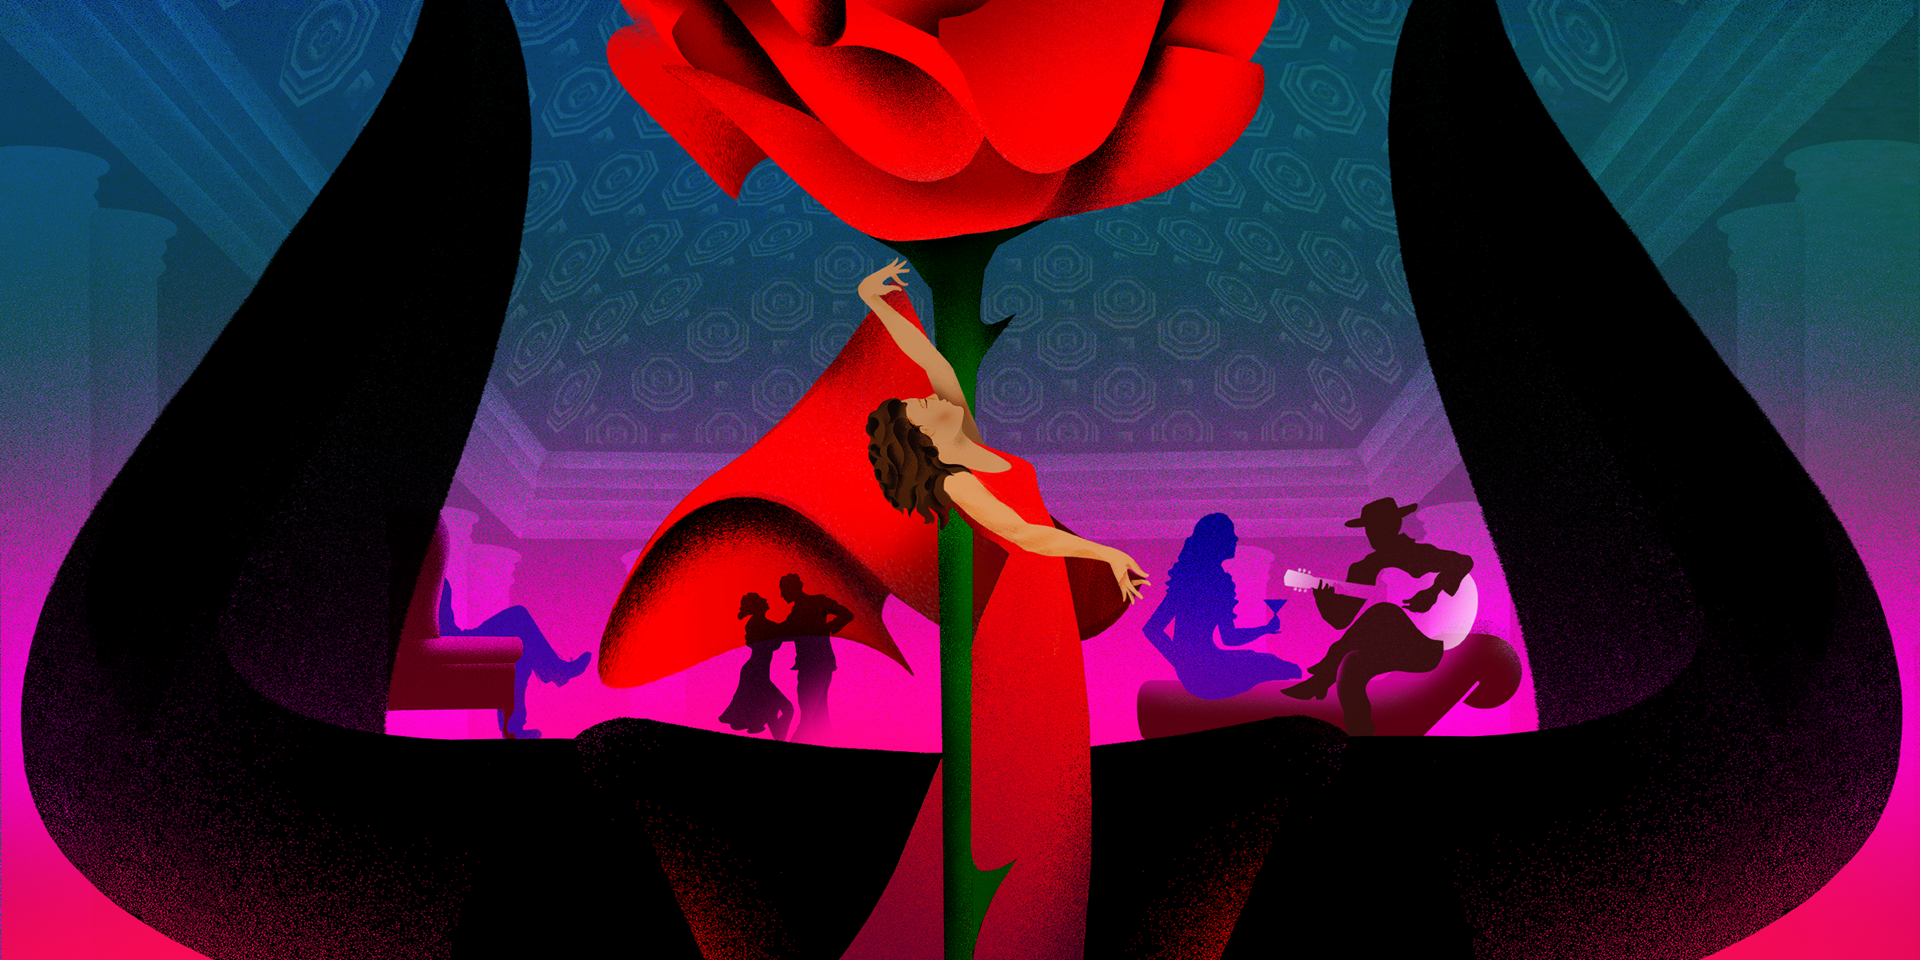 Graphic illustration of Carmen in a red dress twisted around the stem of a red rose. In the background, there are people dancing and mingling on top of the horns of a bull.